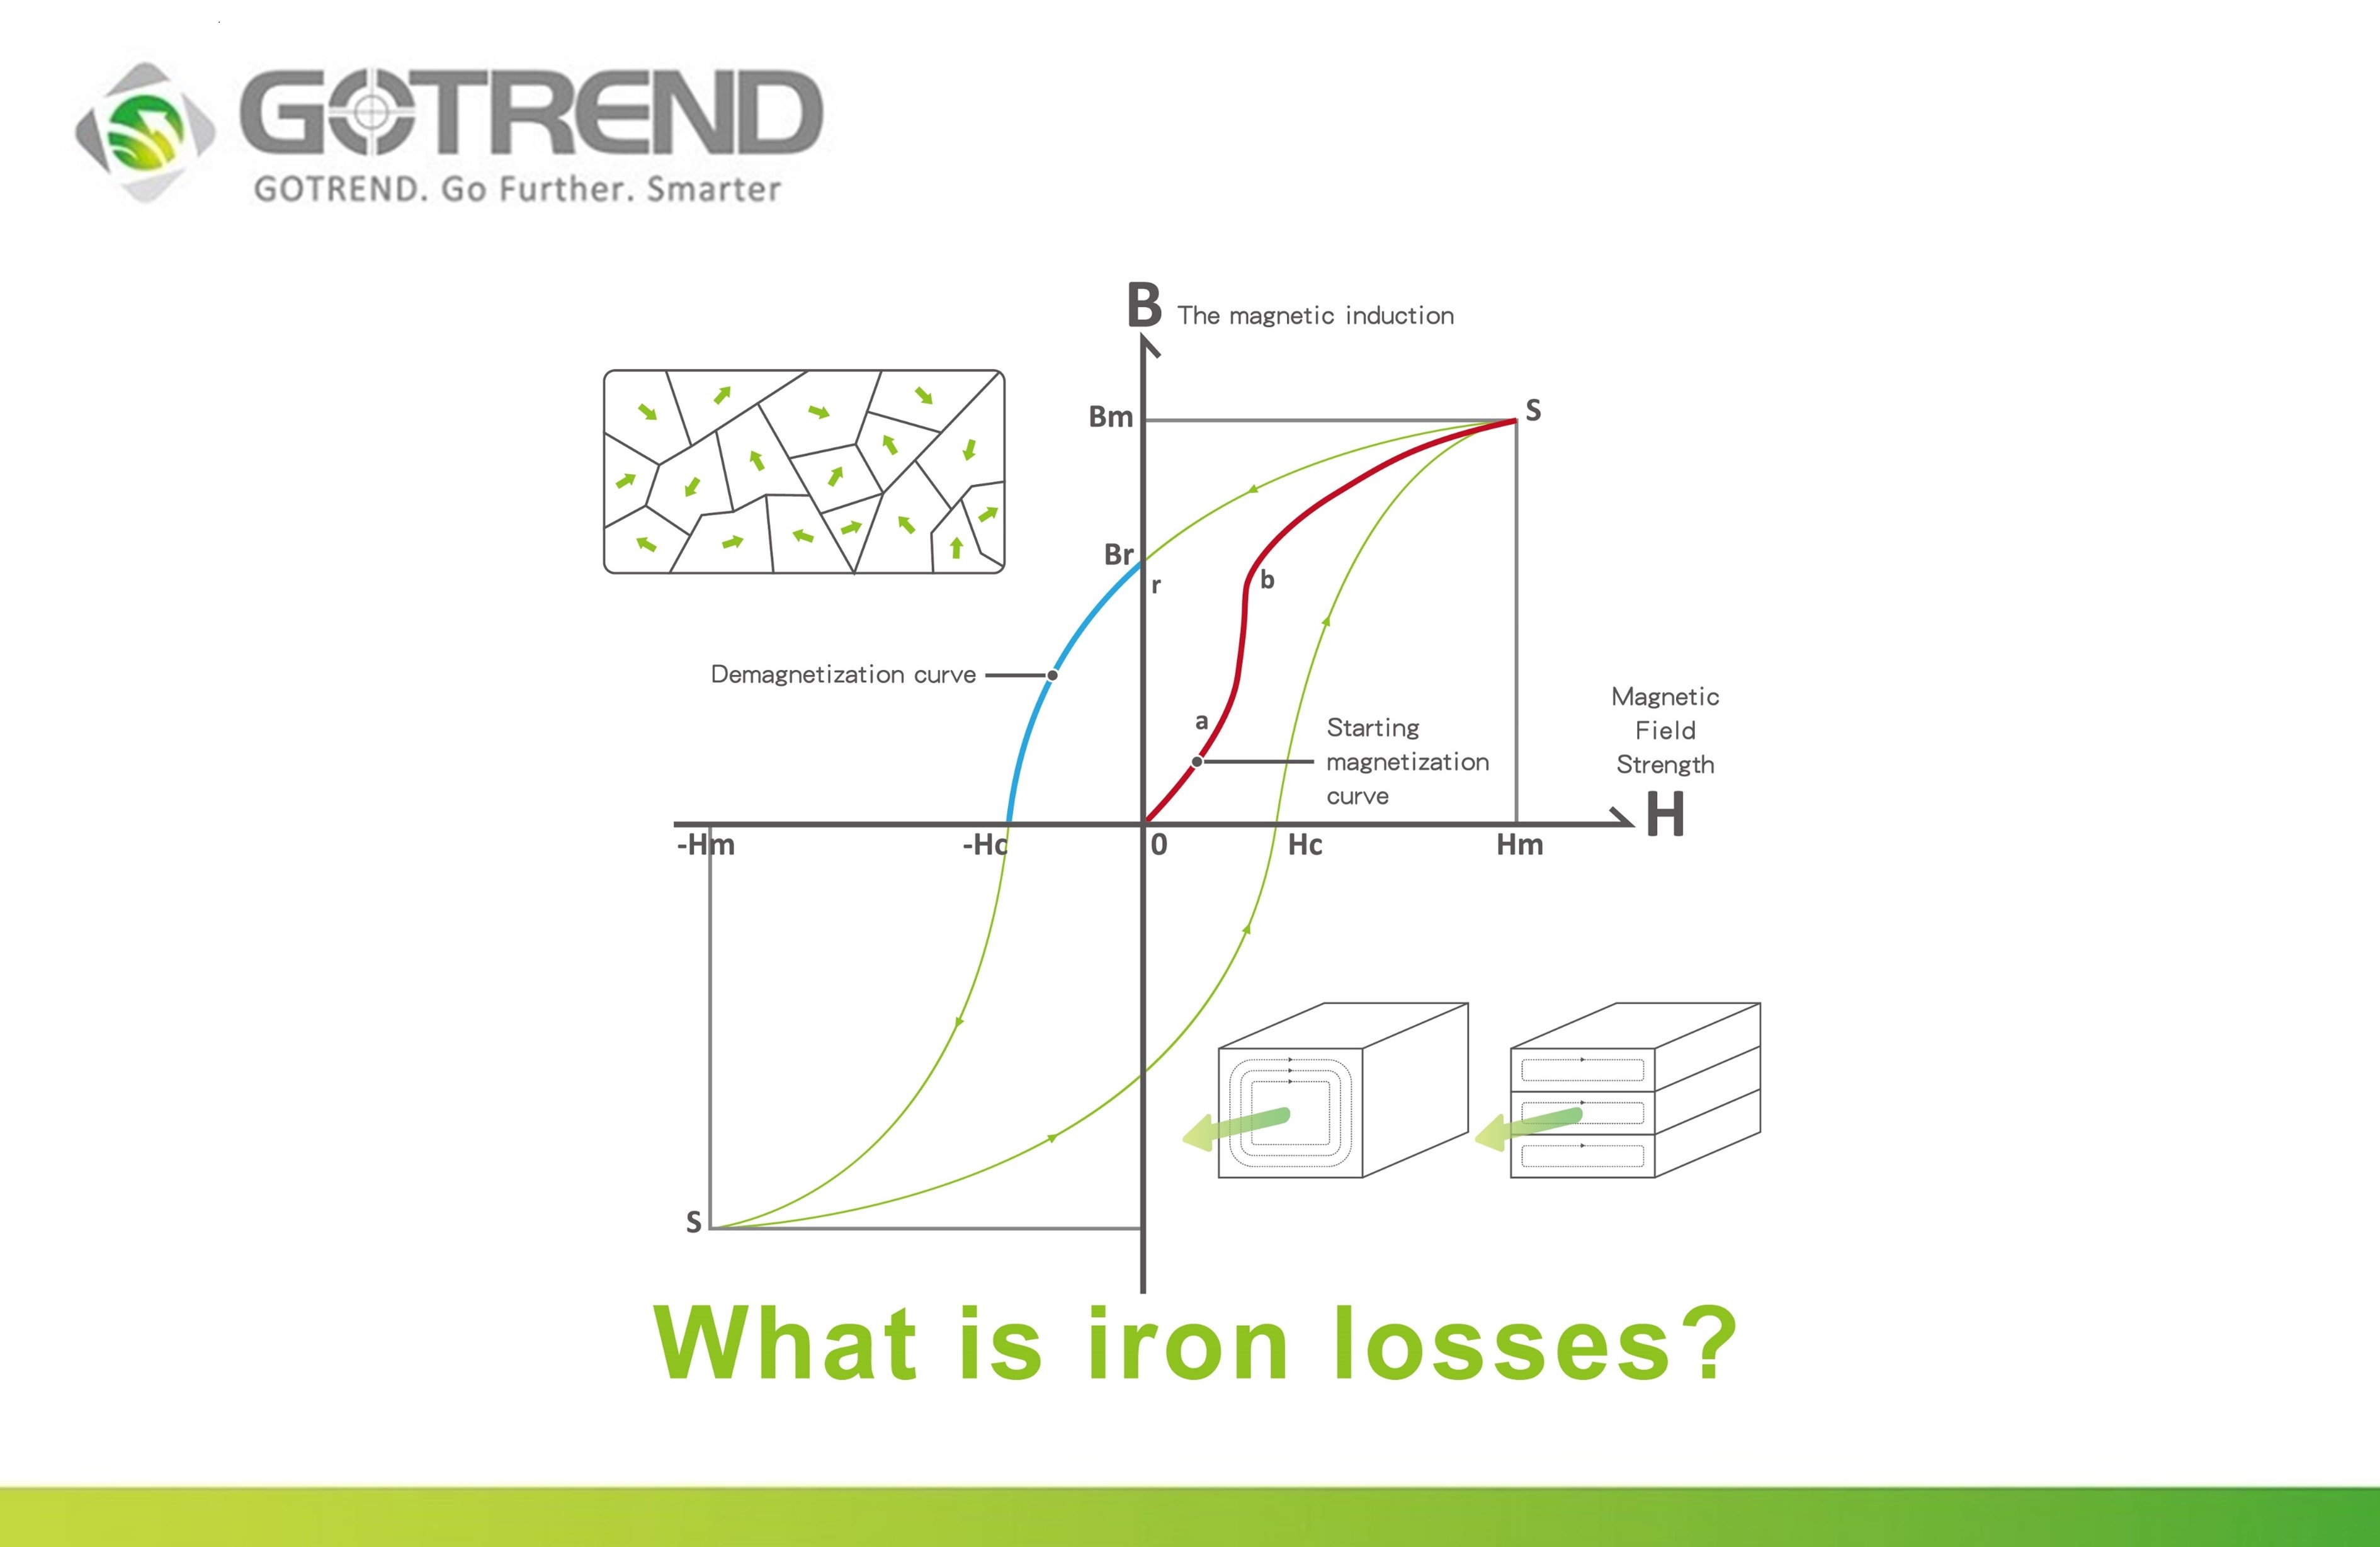 GOTREND-article-What is iron loss? Introduction to hysteresis loss and eddy current loss